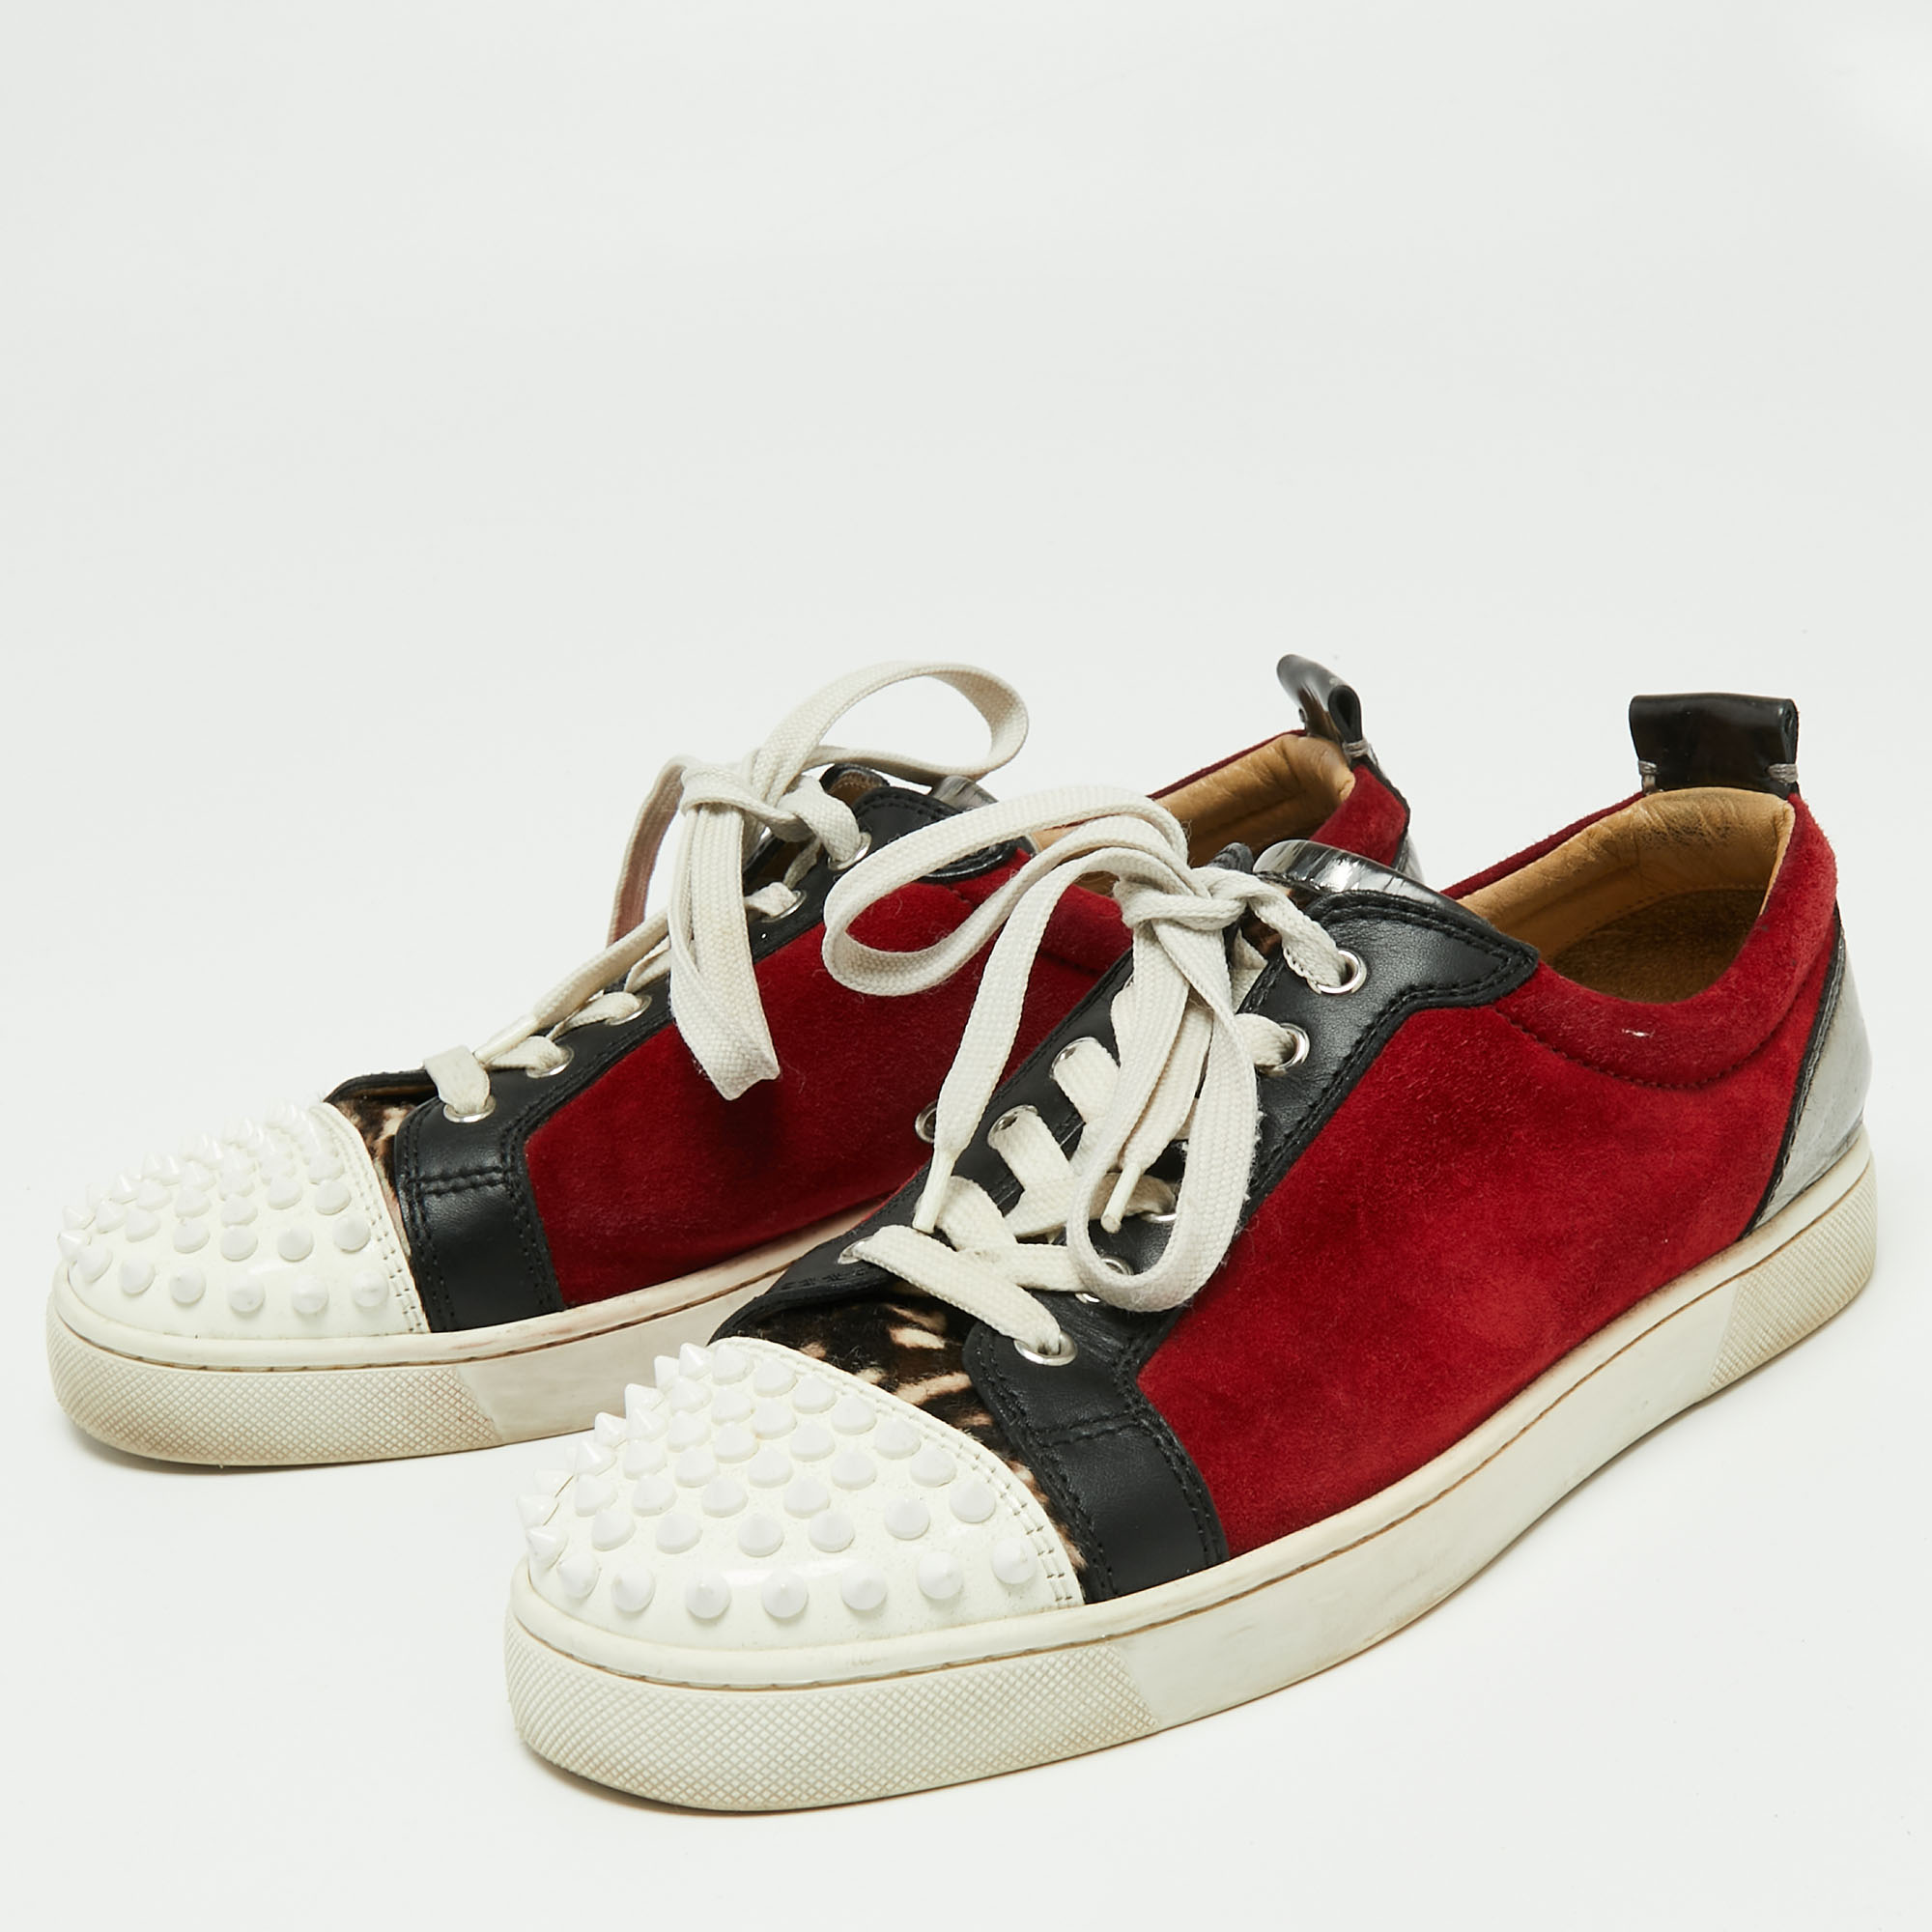 

Christian Louboutin Tri Color Suede, Patent and Leather Junior Spike Low-Top Sneakers Size, Red